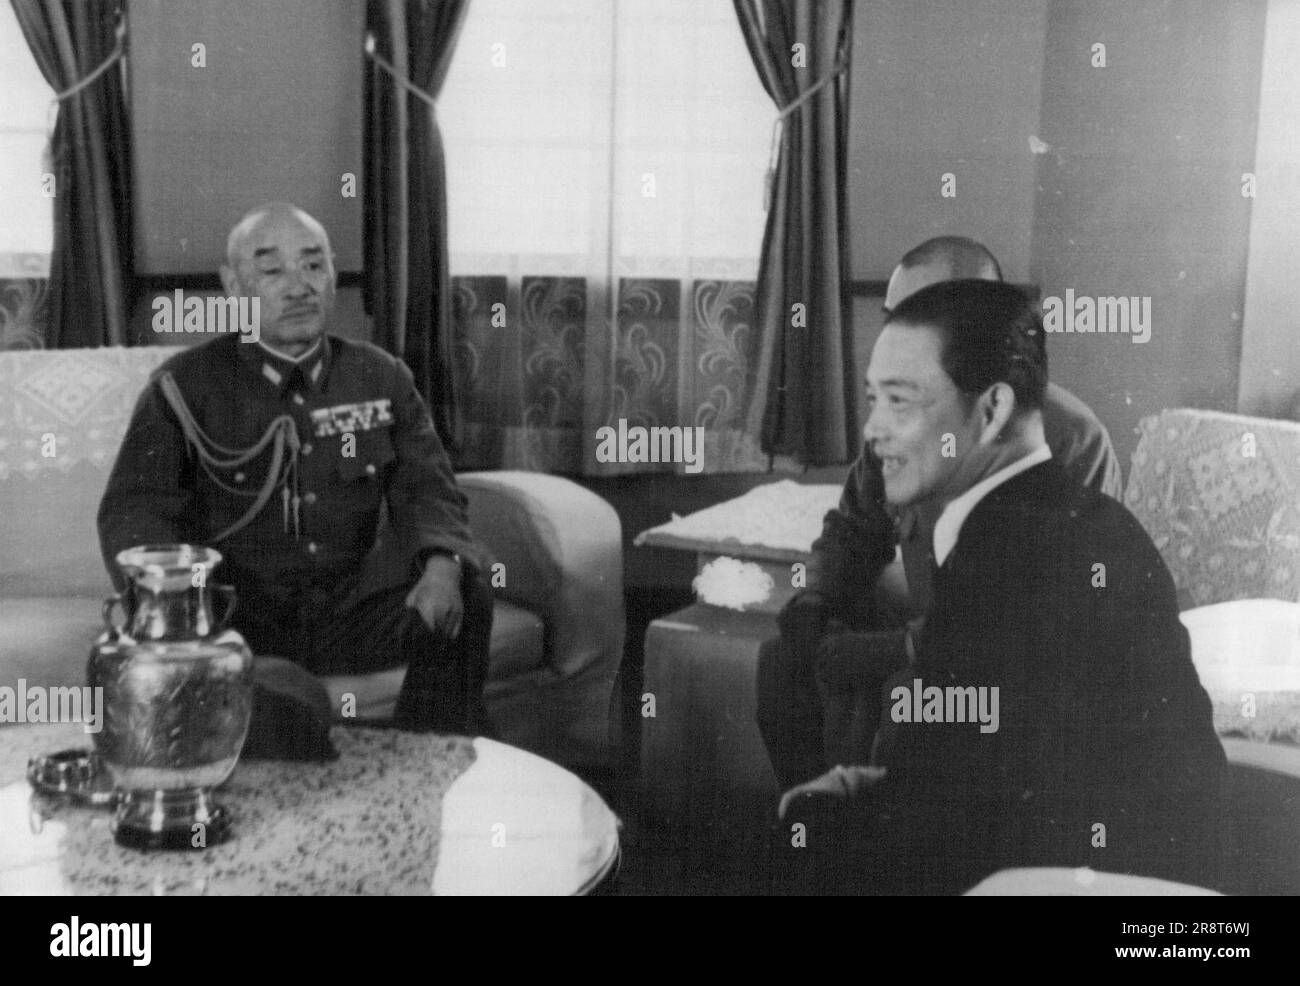 Sugiyama Returns from Nanking ... General Gen Sugiyama, chief of the Army Staff, who has been inspecting the battle fronts in China, during which he also confered in Nanking with Mr. Wang Chingwei, right, returned to Tokyo today. November 06, 1940. (Photo by The Domei News Photos Service). Stock Photo